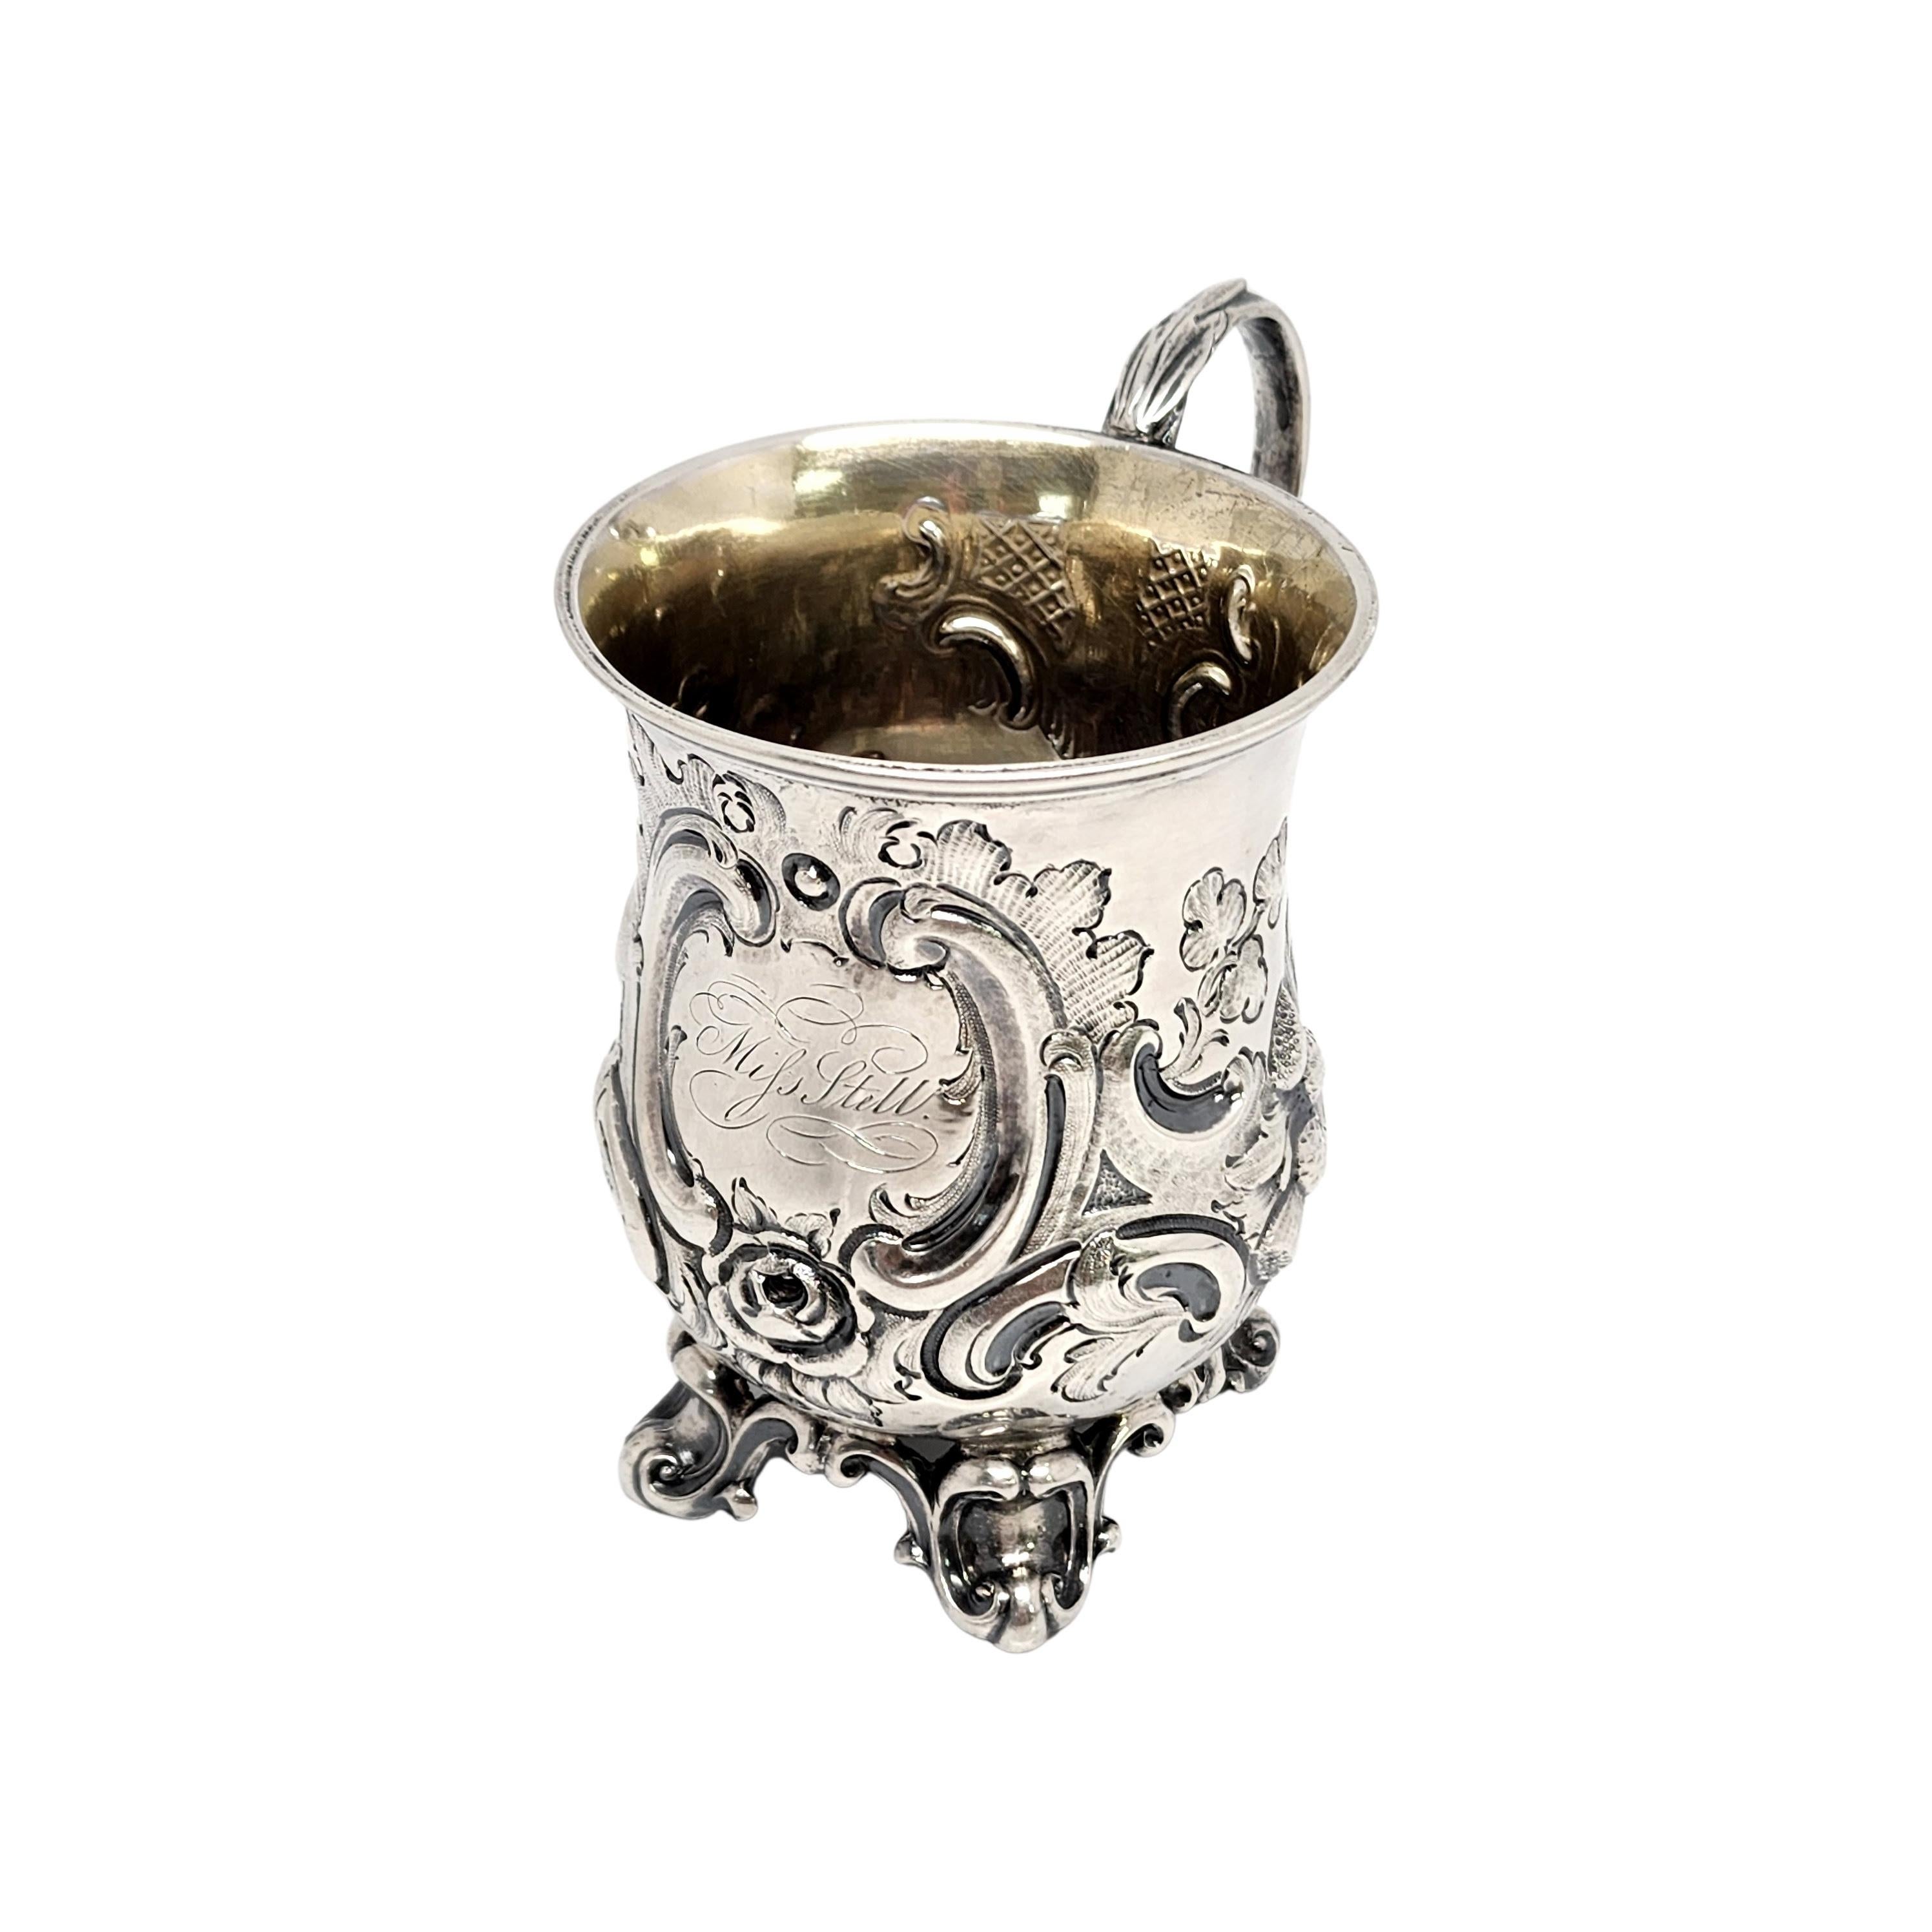 Antique George Angell London England Sterling Silver Footed Cup with Monogram In Good Condition For Sale In Washington Depot, CT